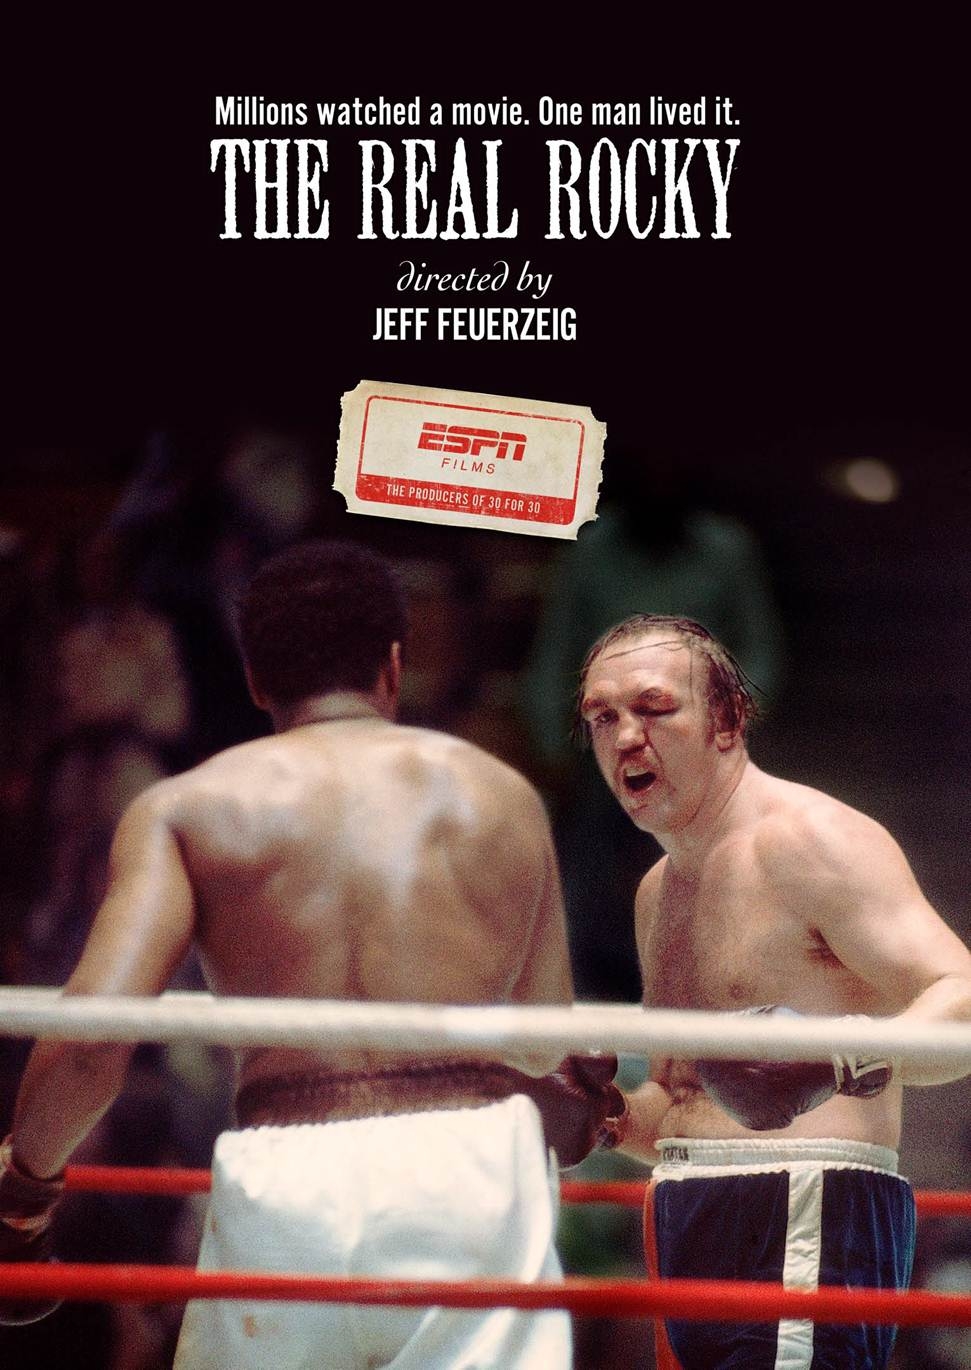 ESPN FILMS: THE REAL ROCKY